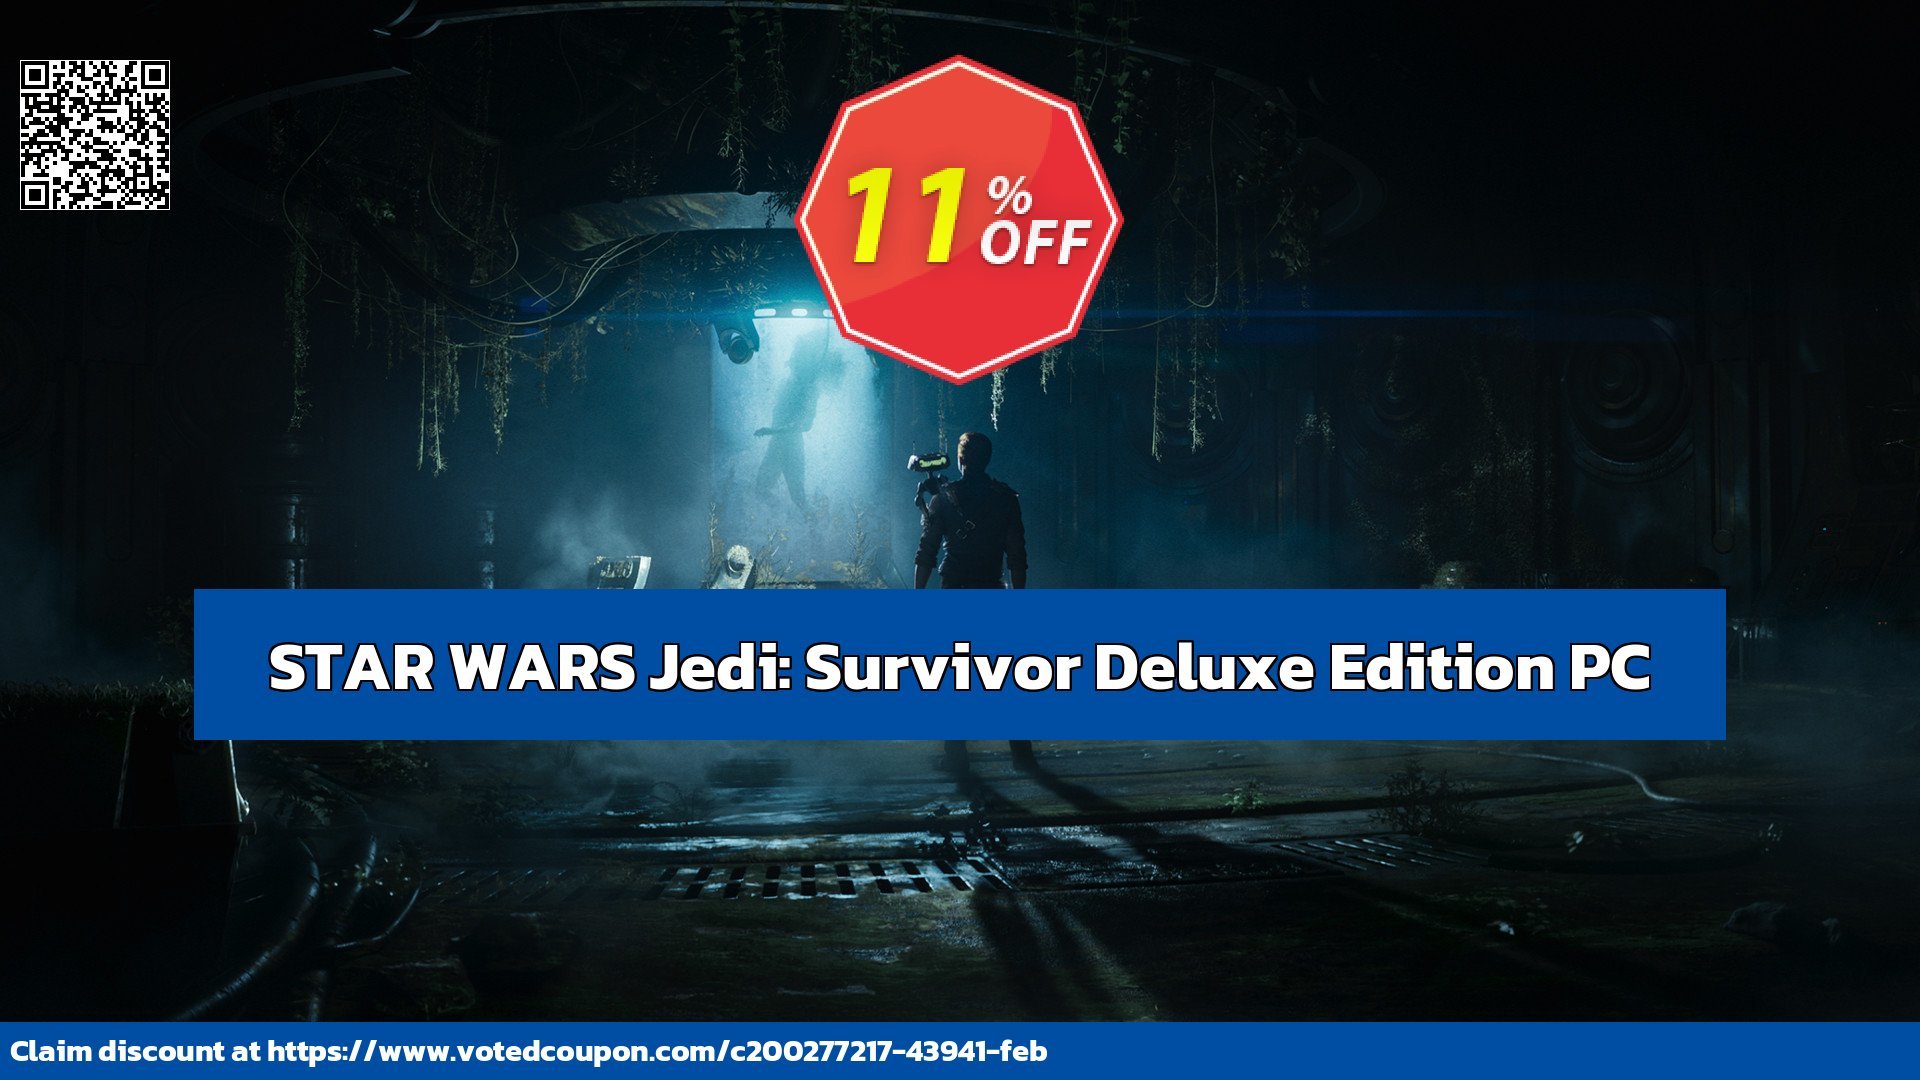 STAR WARS Jedi: Survivor Deluxe Edition PC Coupon Code May 2024, 11% OFF - VotedCoupon